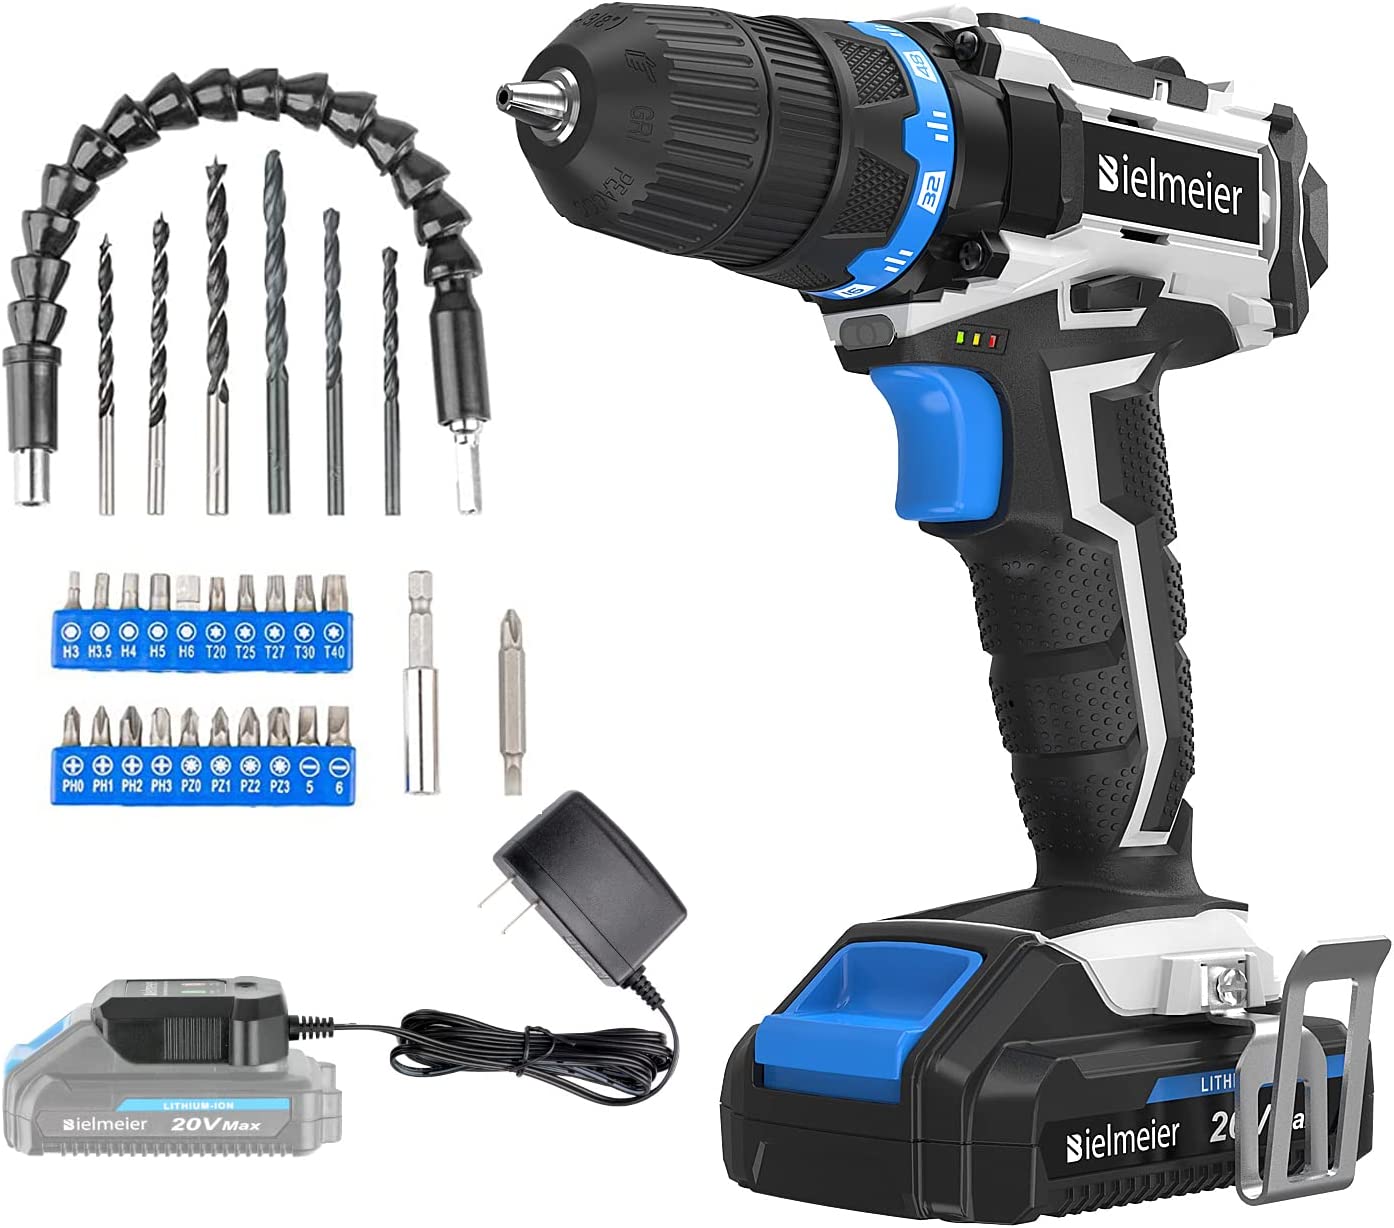 Bielmeier 20V MAX Cordless Drill Set, Power drill kit with Lithium-Ion and charger,38 inches Keyless Chuck, Electric Drill with Variable Speed, LED and 29pcs Drill Bits (BCDK-29)…